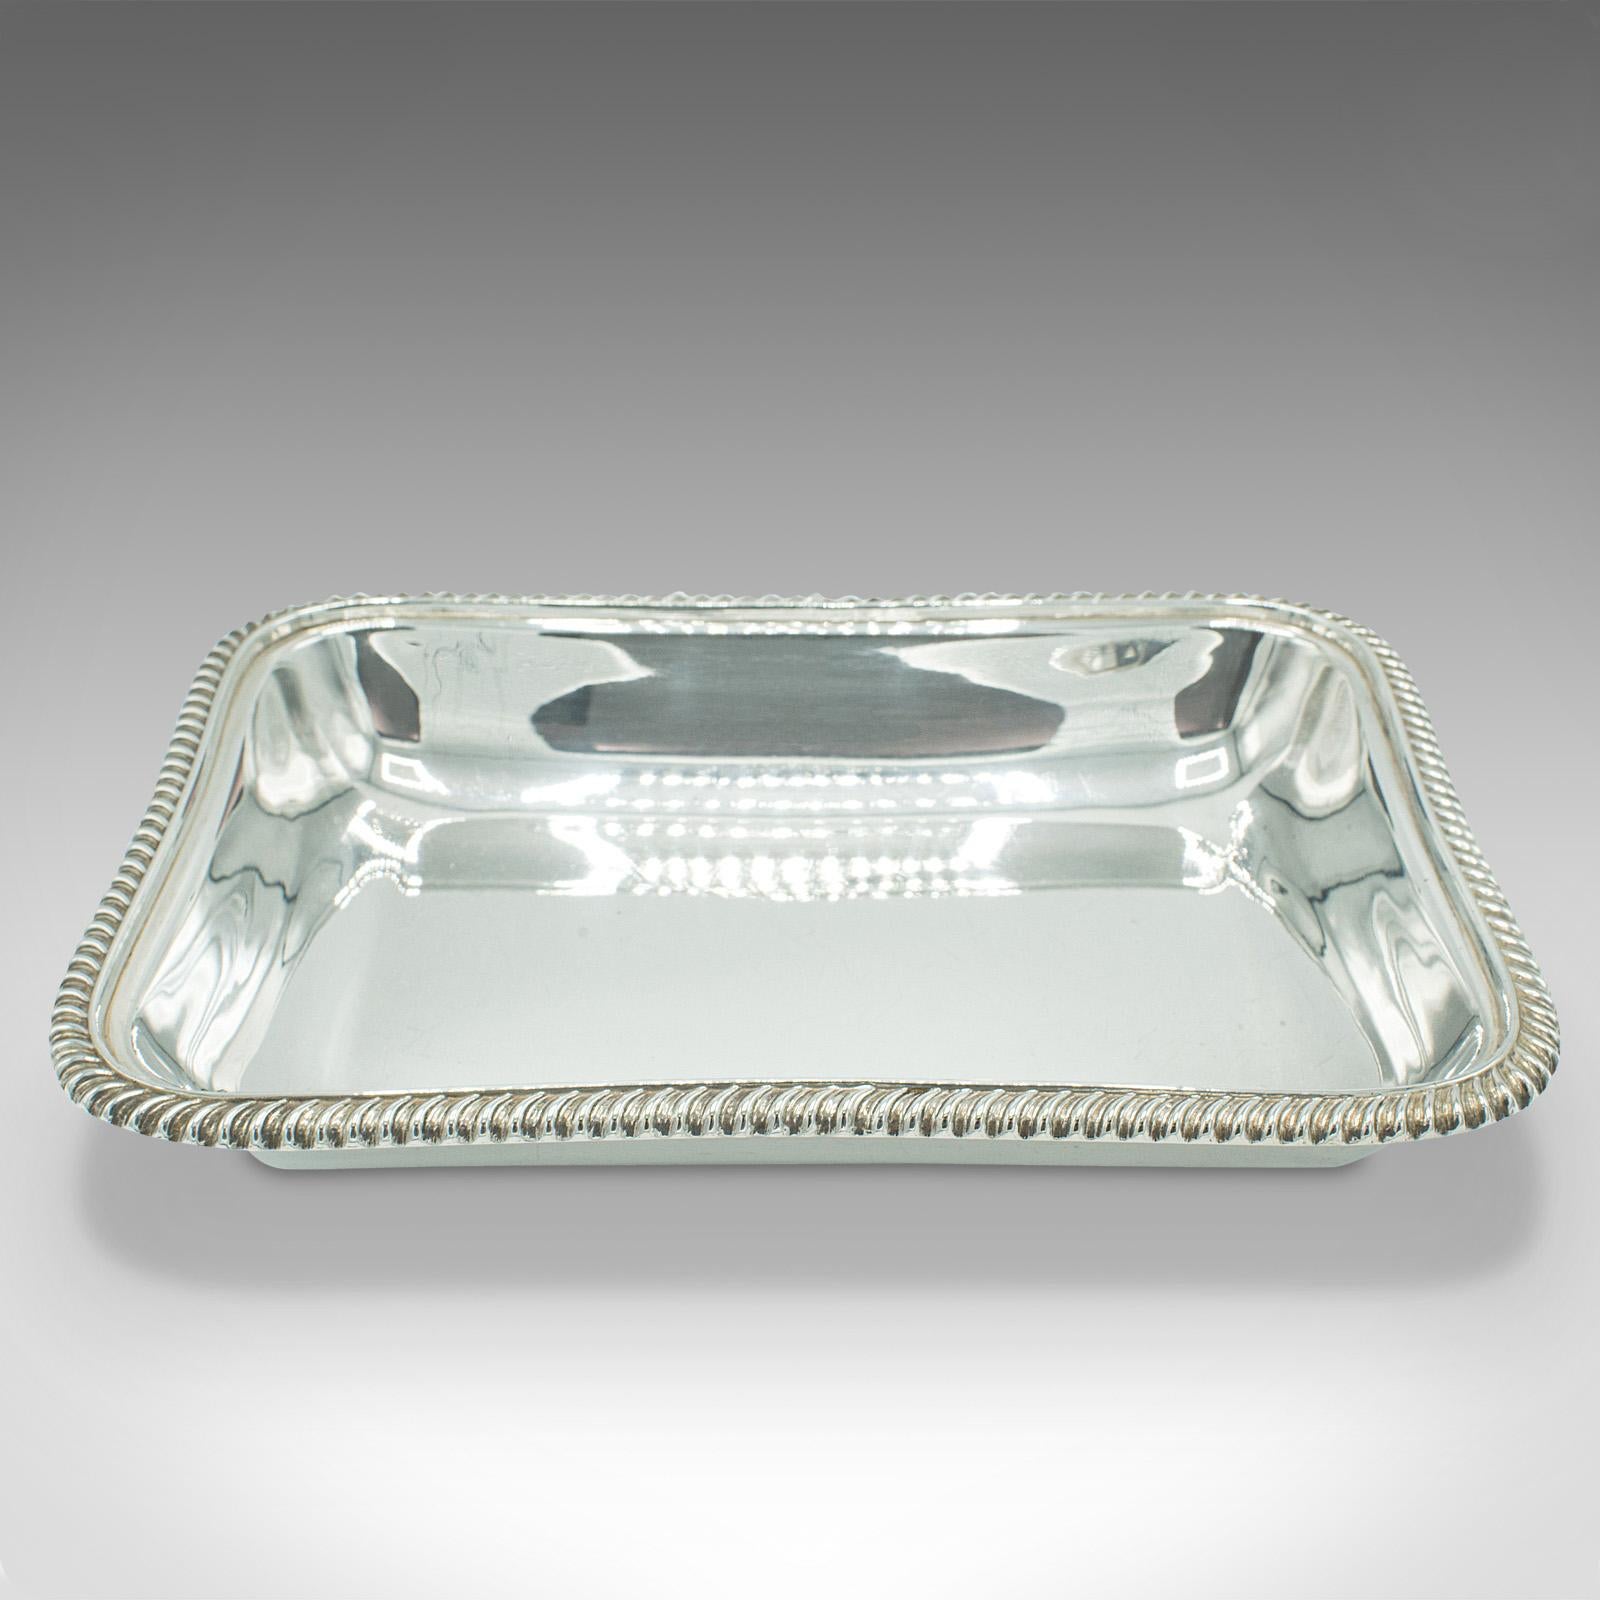 This is an antique bonbon dish. An English silver plated serving or fruit tray, dating to the late Victorian period, circa 1900.

Attractive dish, ideal for serving treats or delicious fruits
Displays a desirable aged patina - some light tarnish